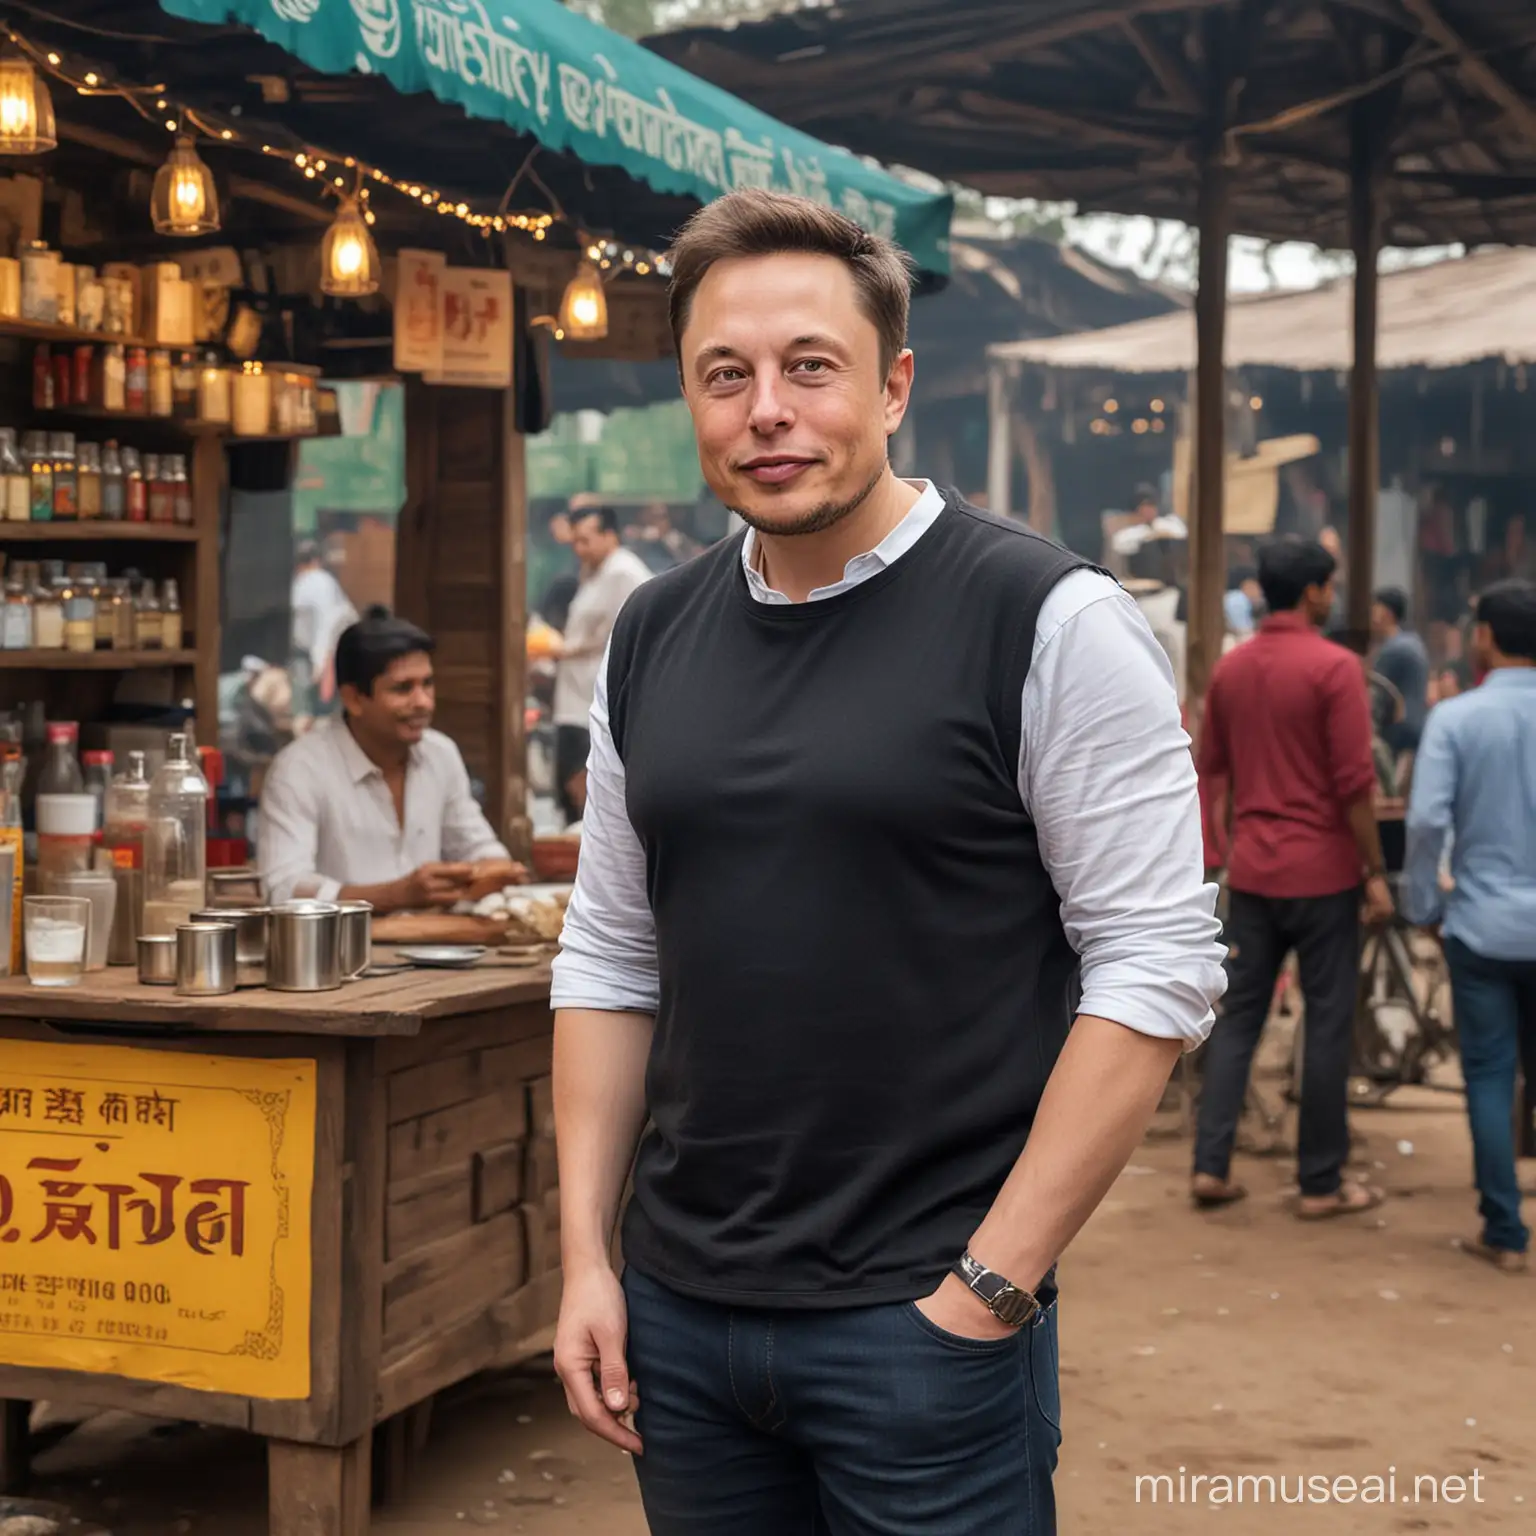 create an image of elon musk in simple clothes standing near a tea stall in India with a cup of hot tea in his hand